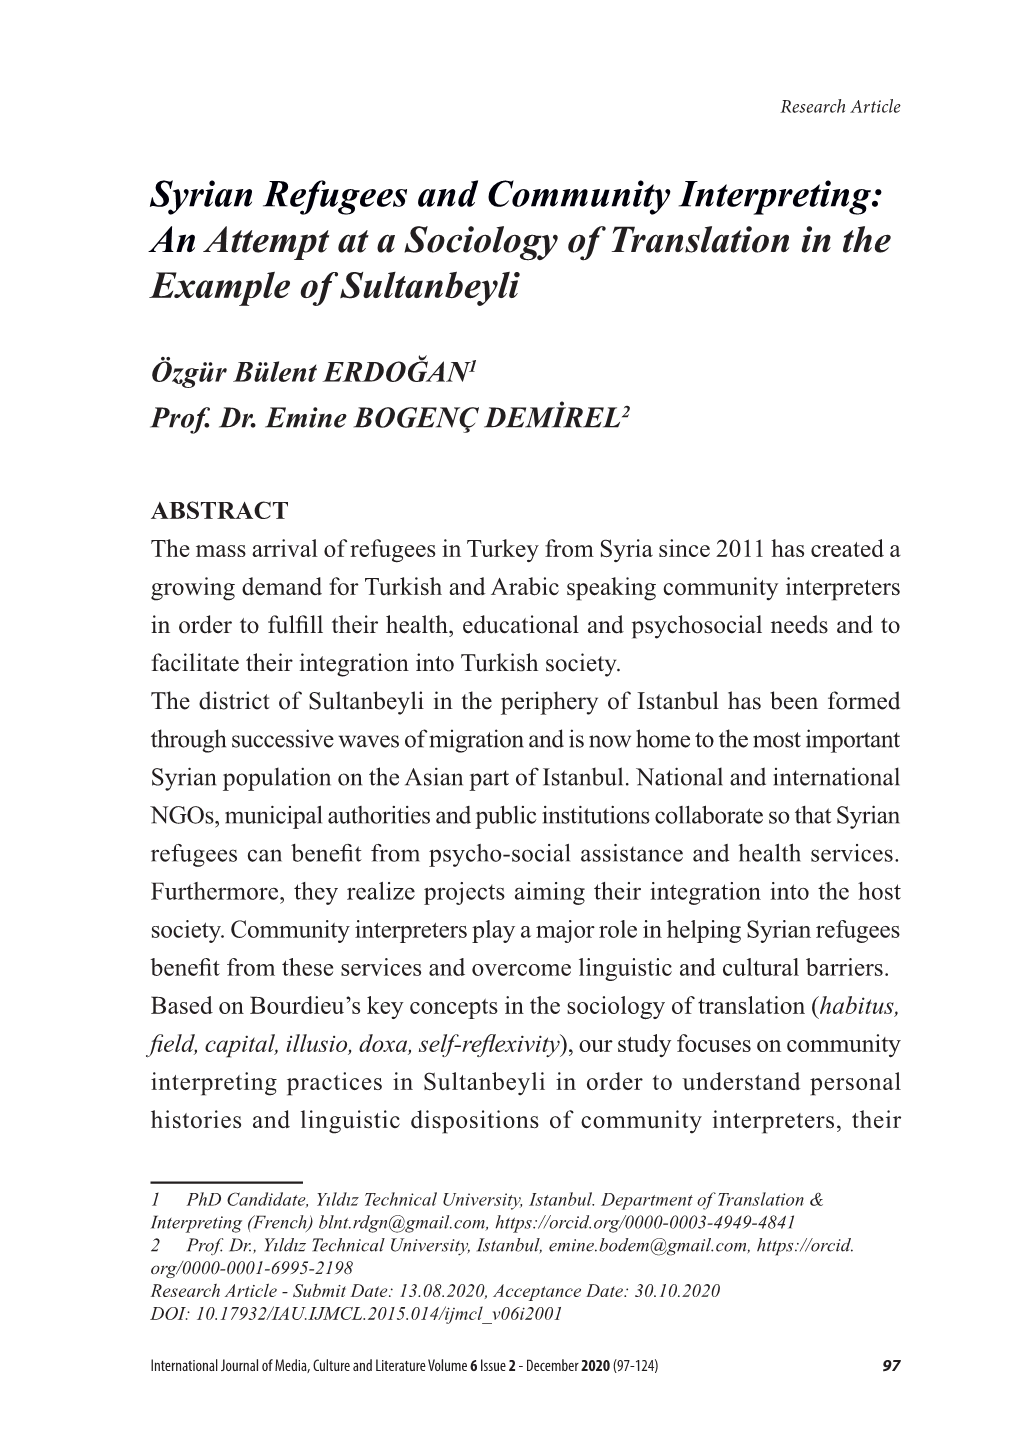 Syrian Refugees and Community Interpreting: an Attempt at a Sociology of Translation in the Example of Sultanbeyli